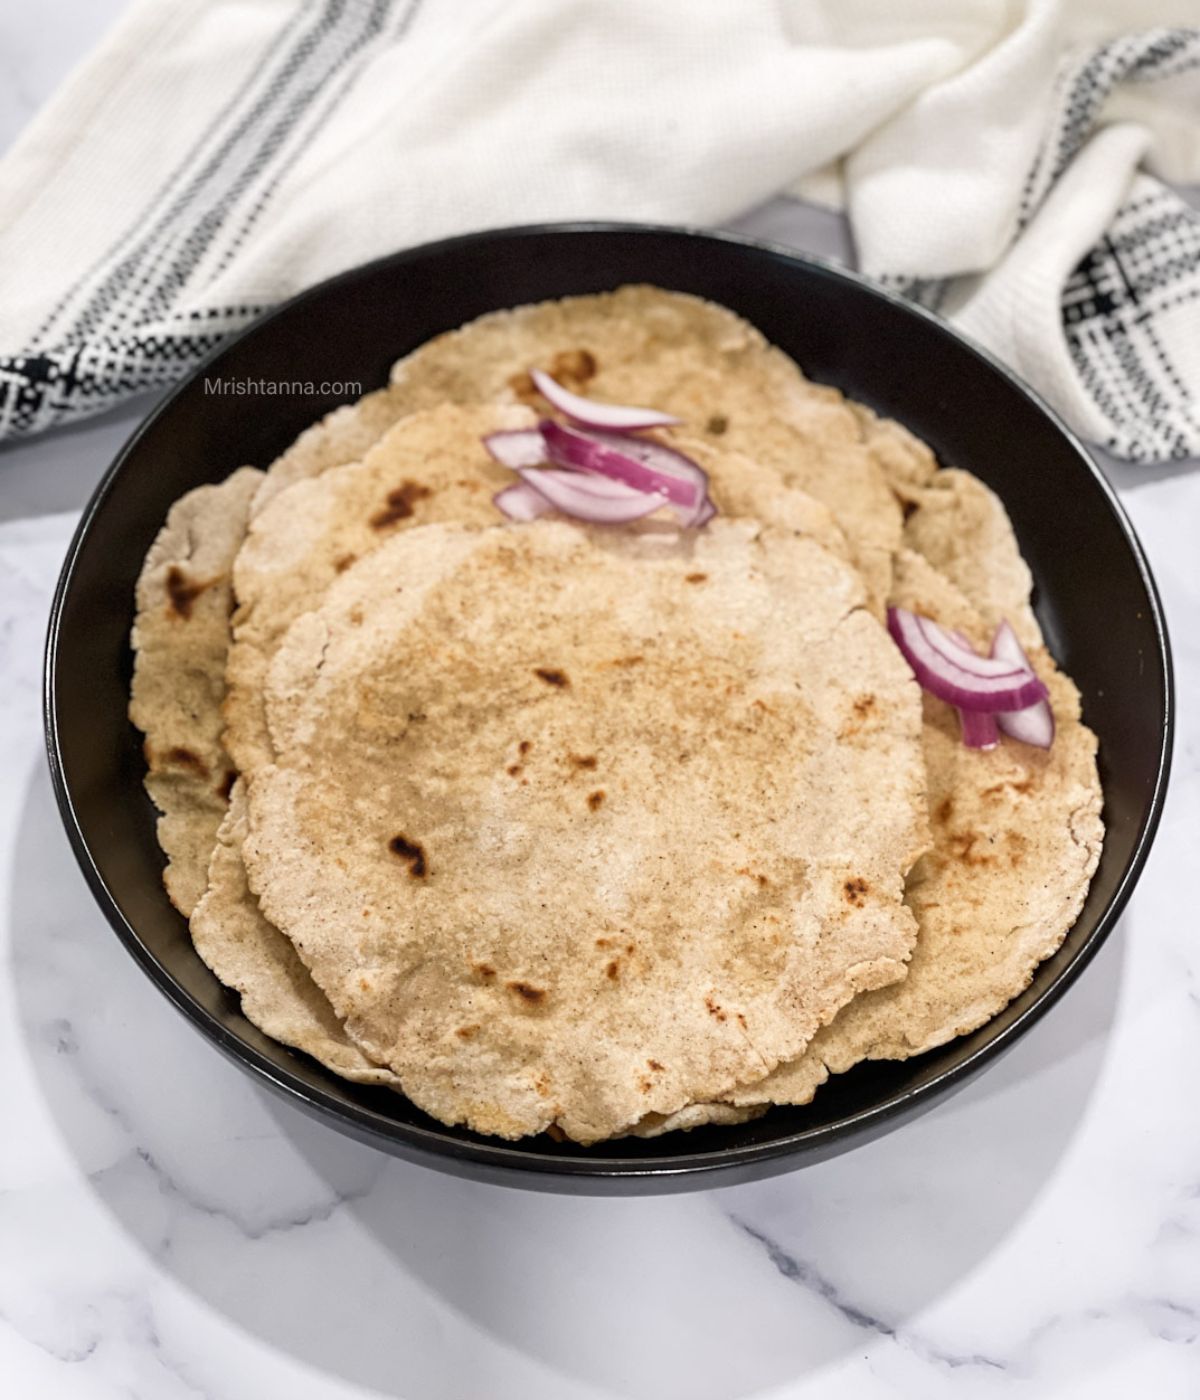 Staked sorghum rotis on the plate and topped with sliced onions.